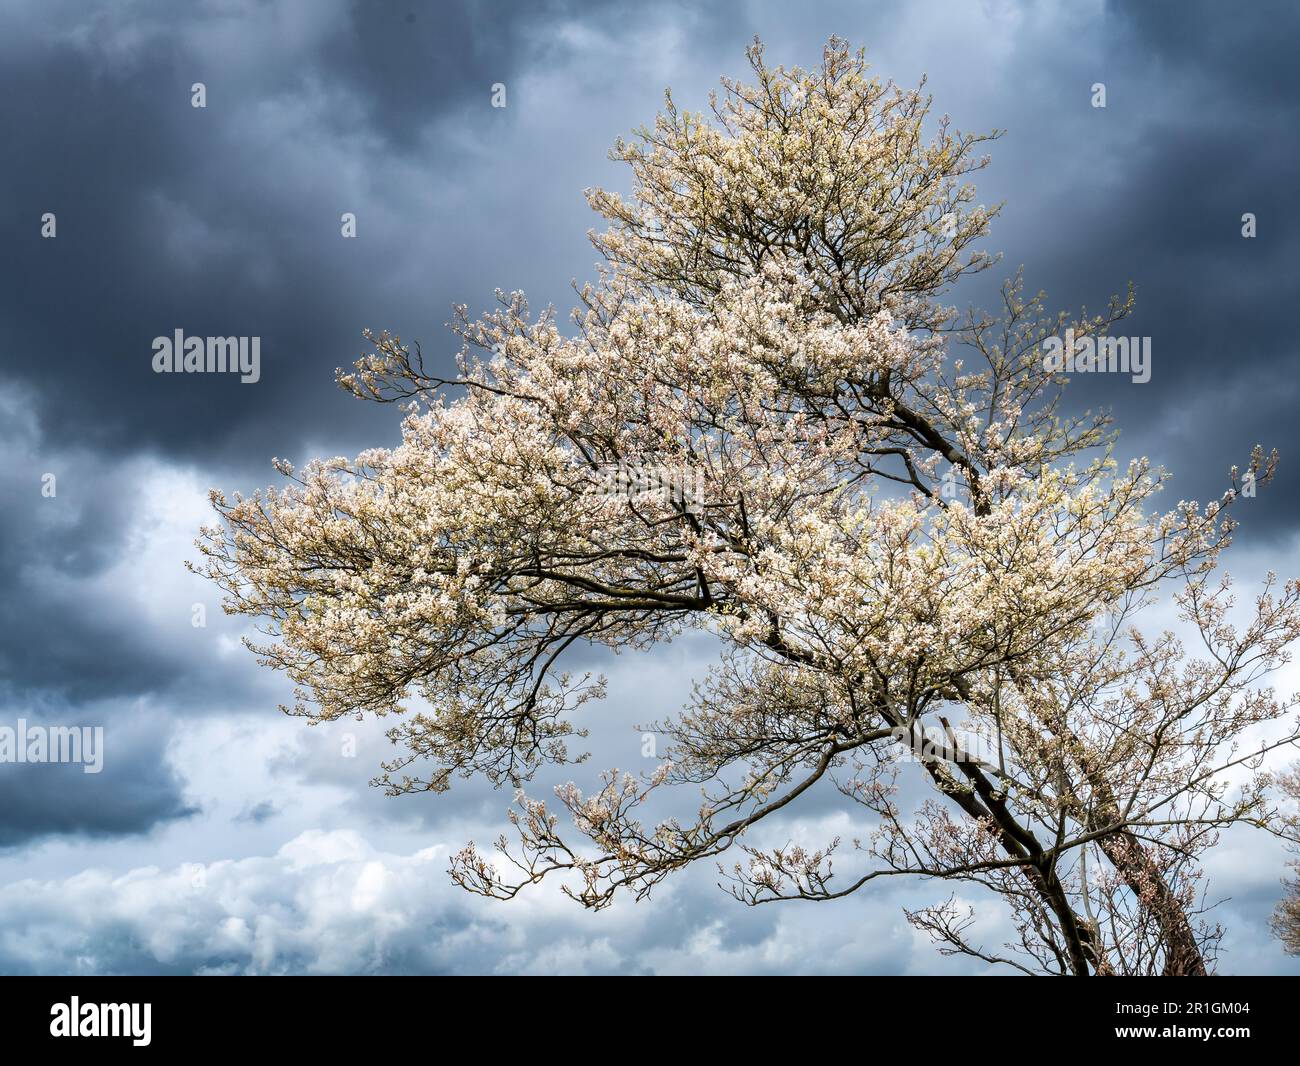 Juneberry or snowy mespilus tree, Amelanchier lamarkii, flowering in spring against dark sky with storm clouds, Netherlands Stock Photo